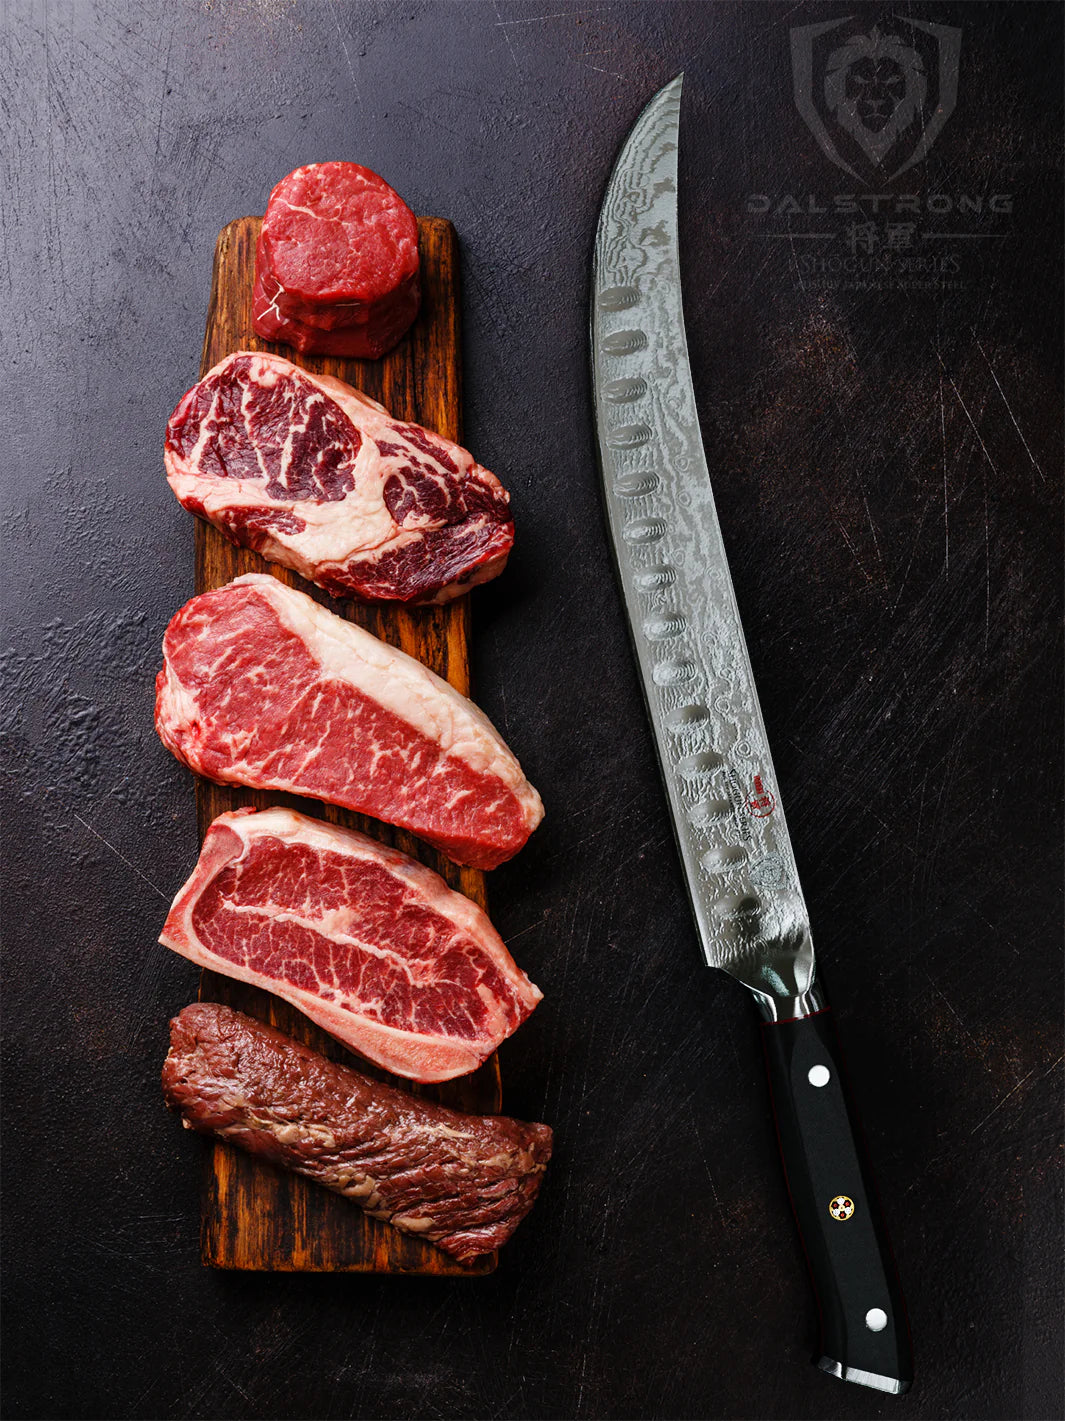 The Most Delicious and Juicy Cuts of Meat